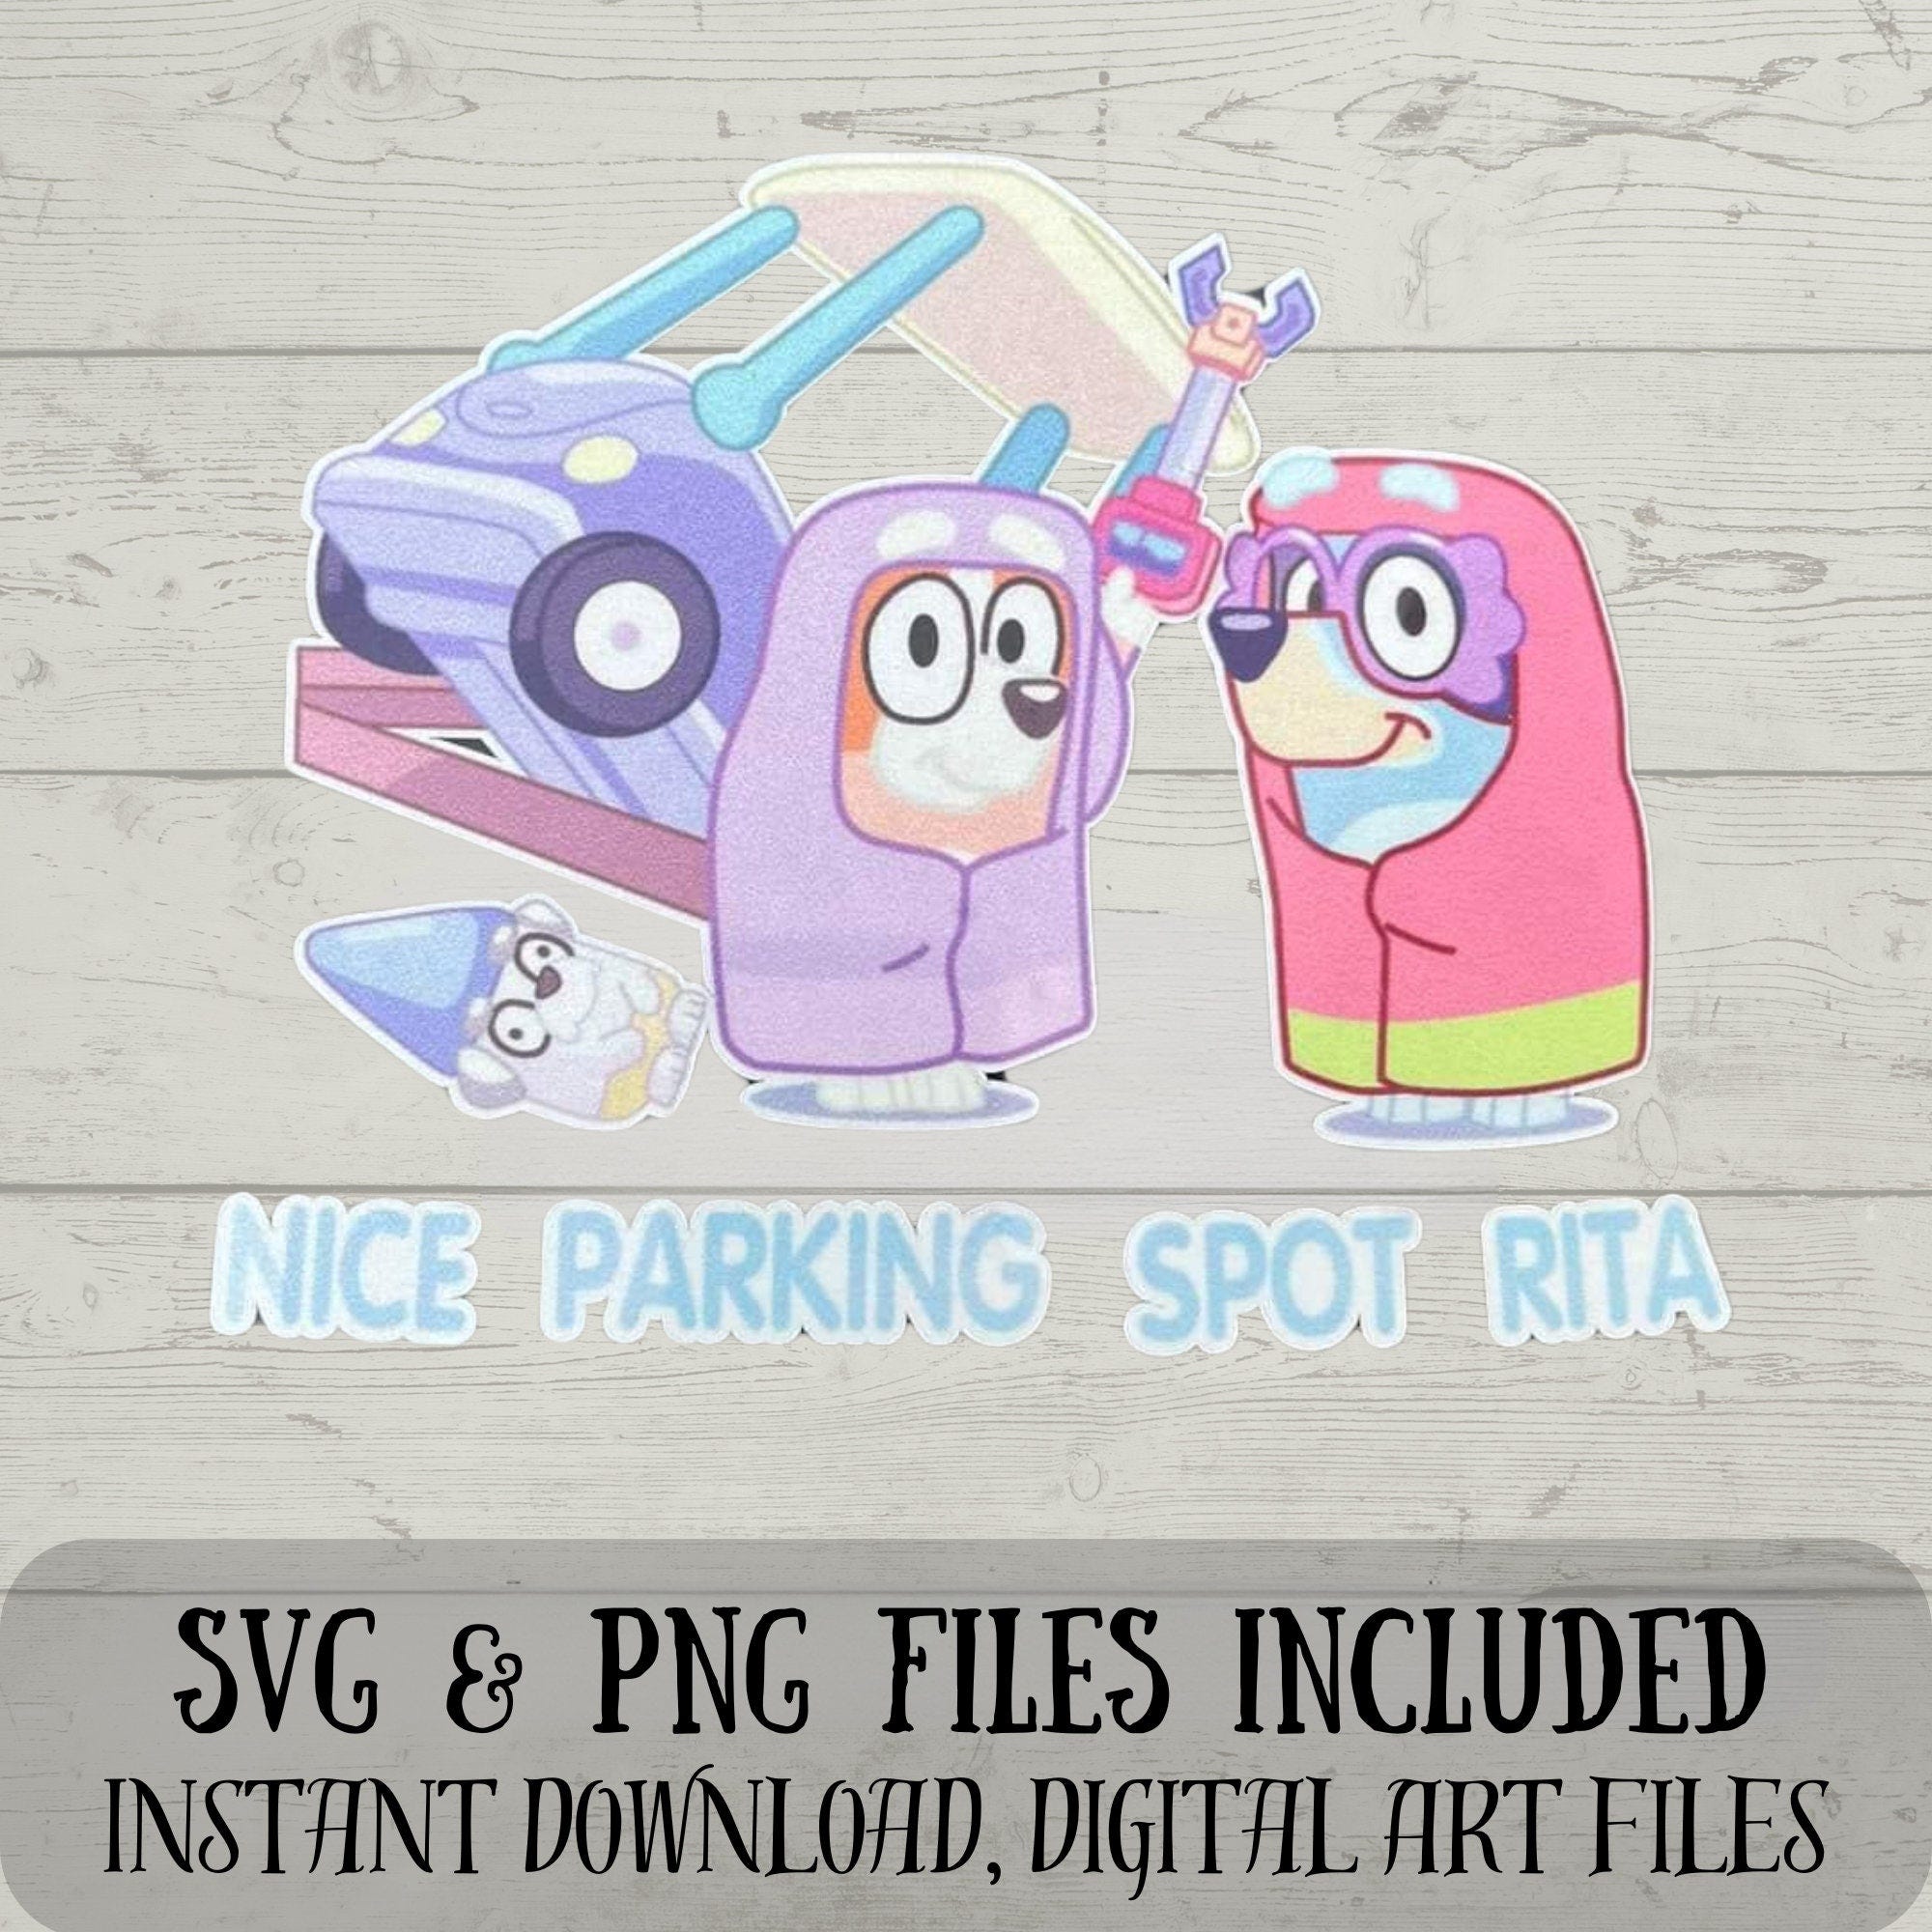 Nice Parking Spot Rita SVG - Bluey SVG - The grannies SVG - Digital Download - Fun Crafting - Perfect for car - svg & png files included